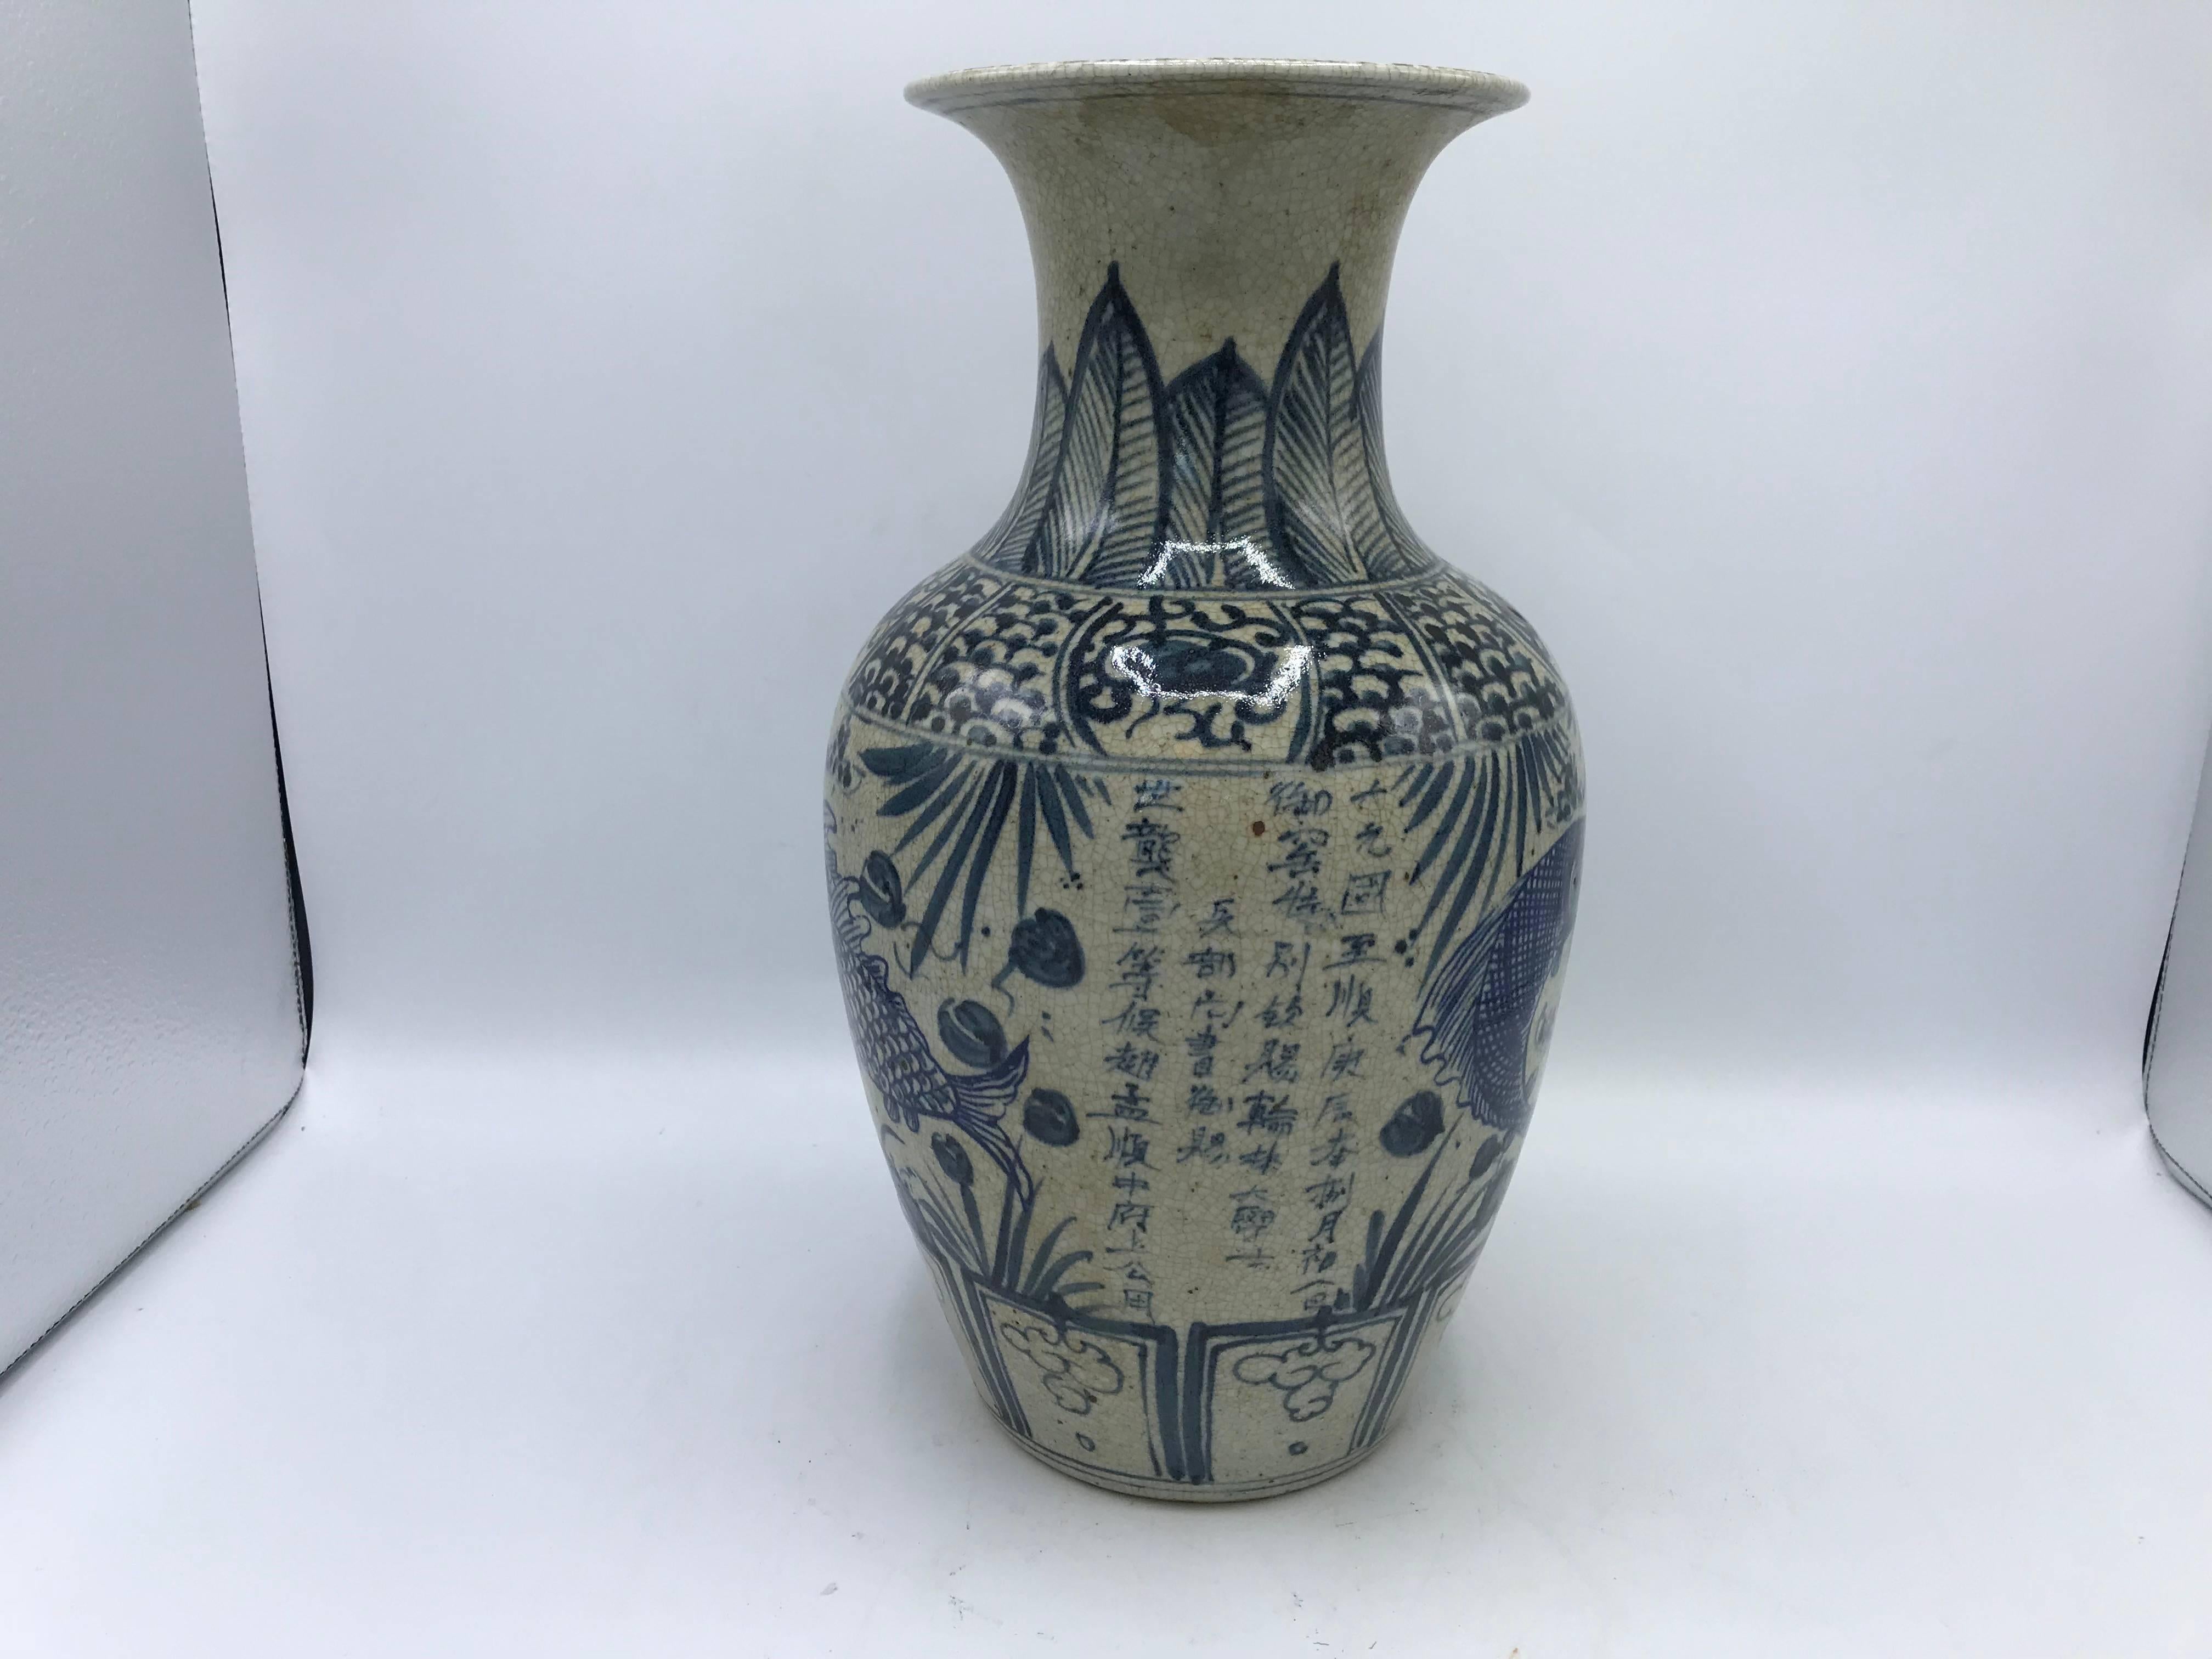 Chinoiserie Blue and White Vase with Fish Motif and Calligraphy